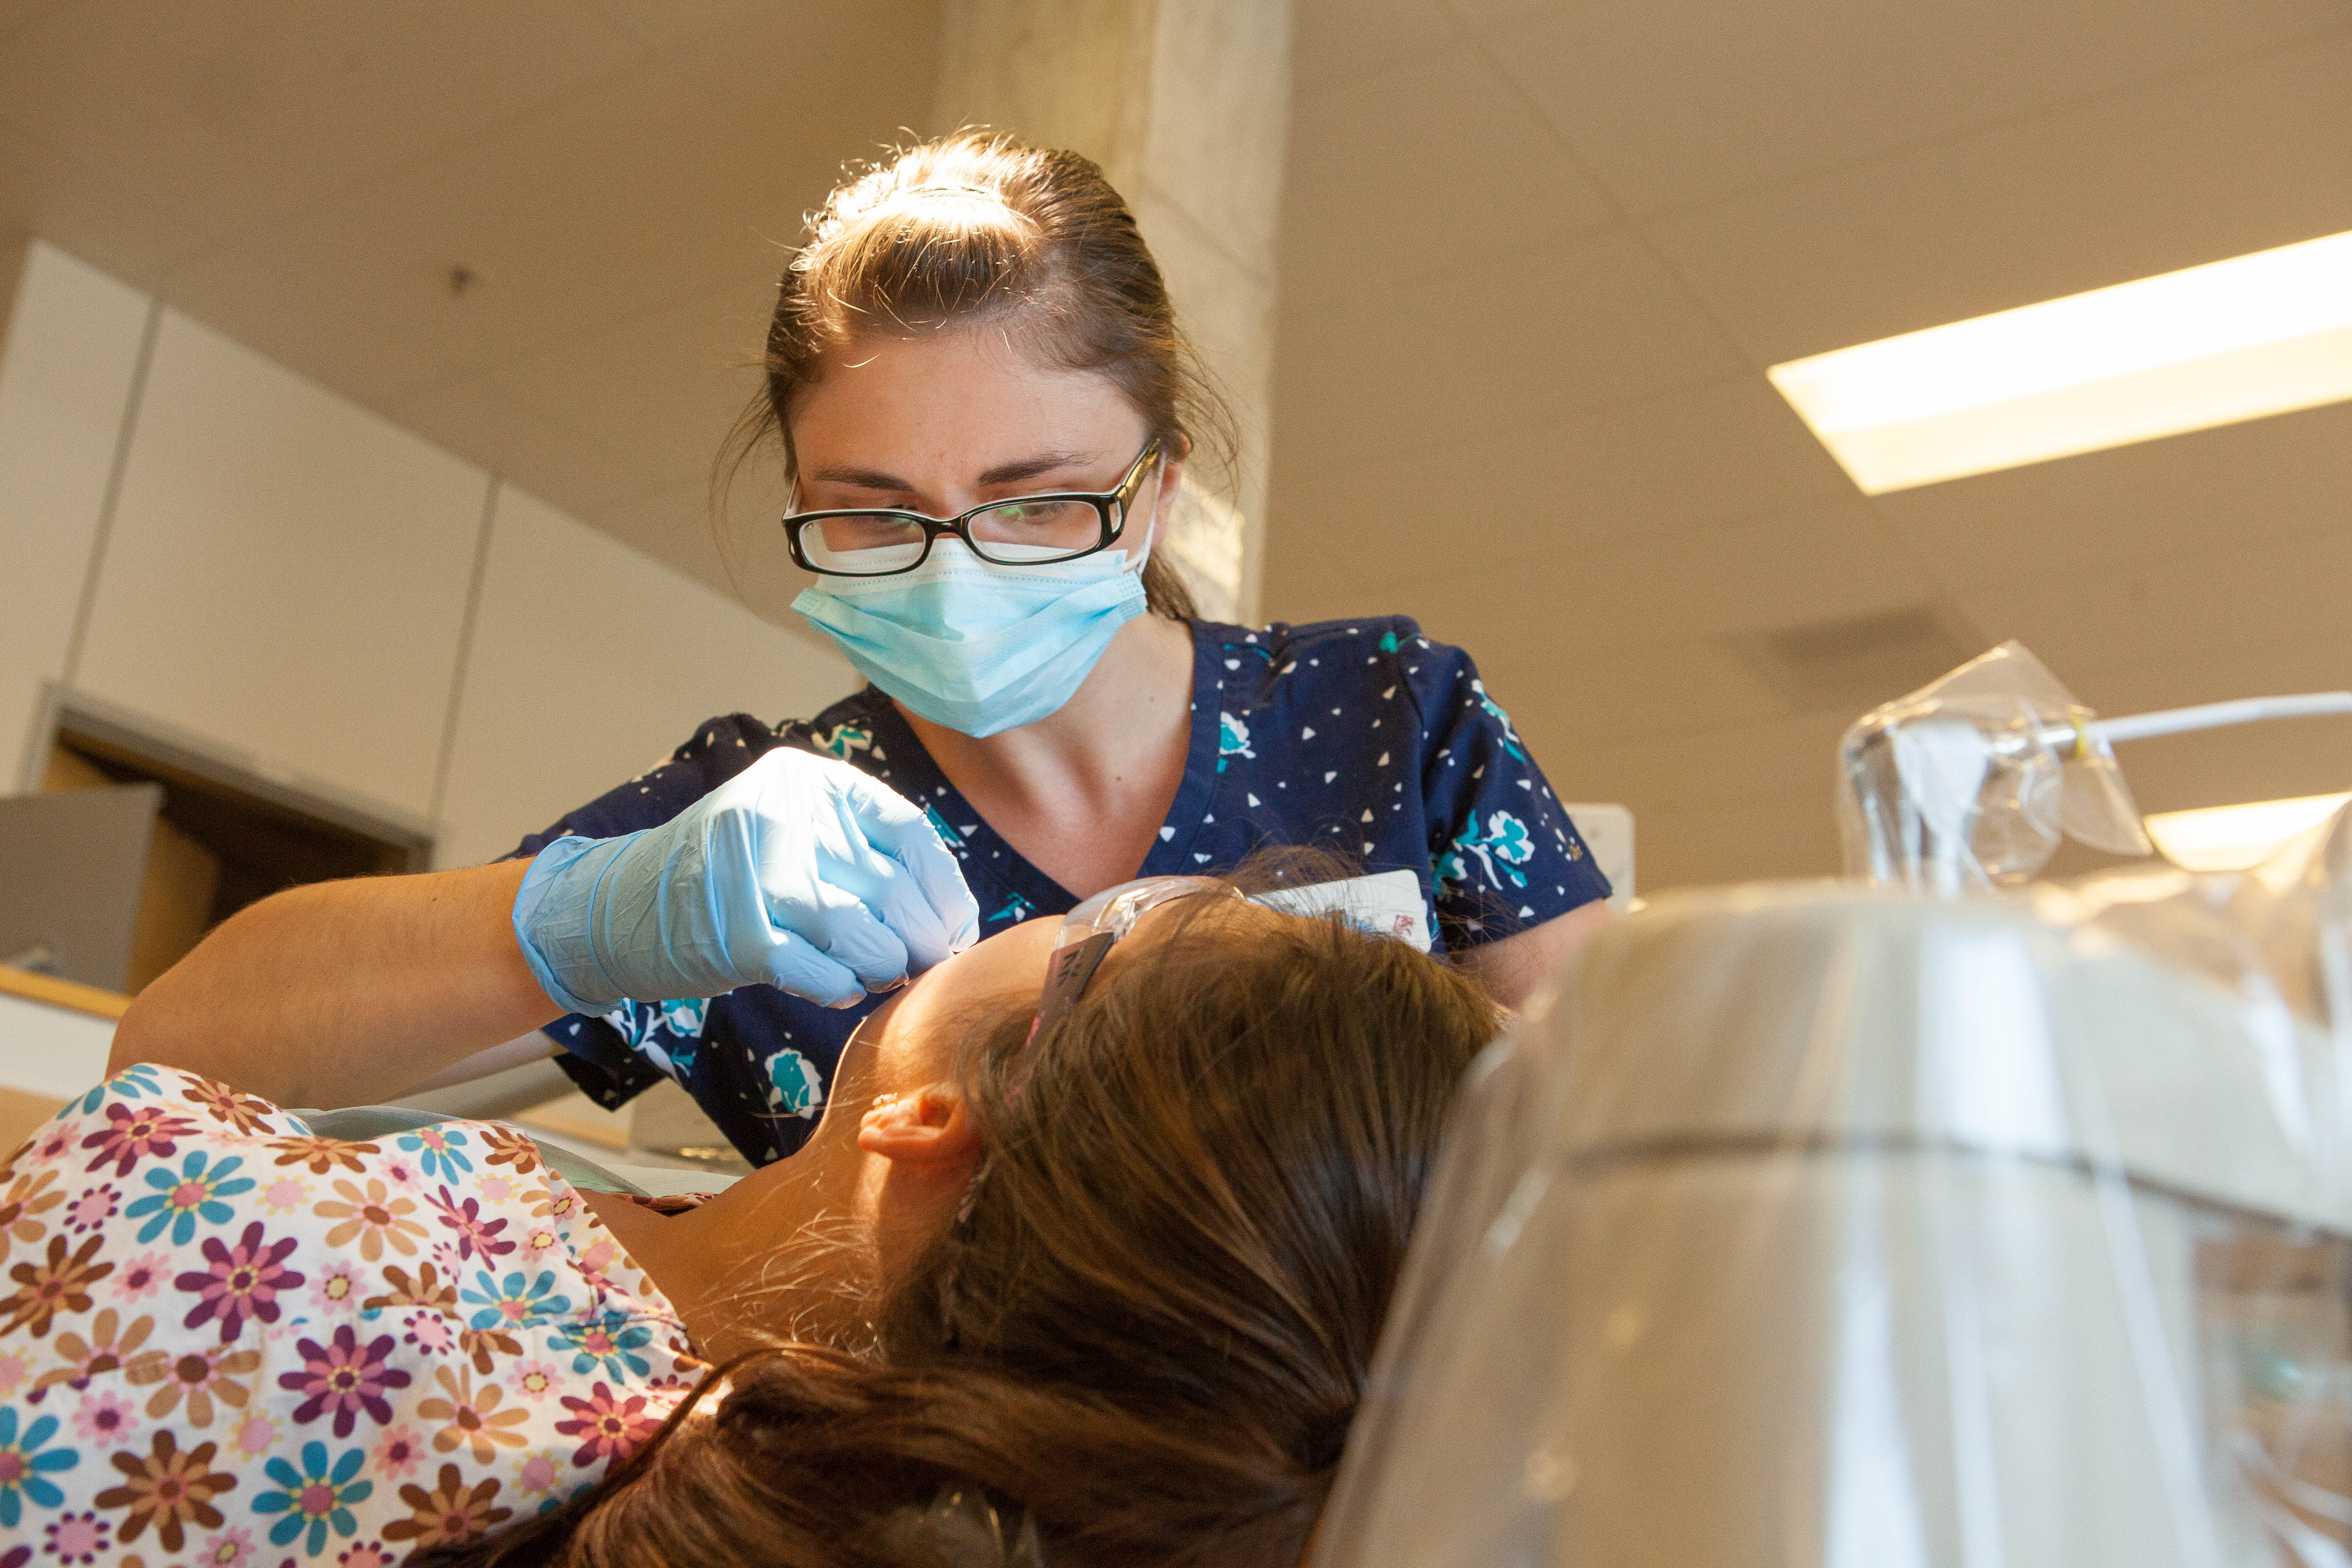 A dental hygiene students works on a patient at Pacific's Dental Hygiene Clinic.